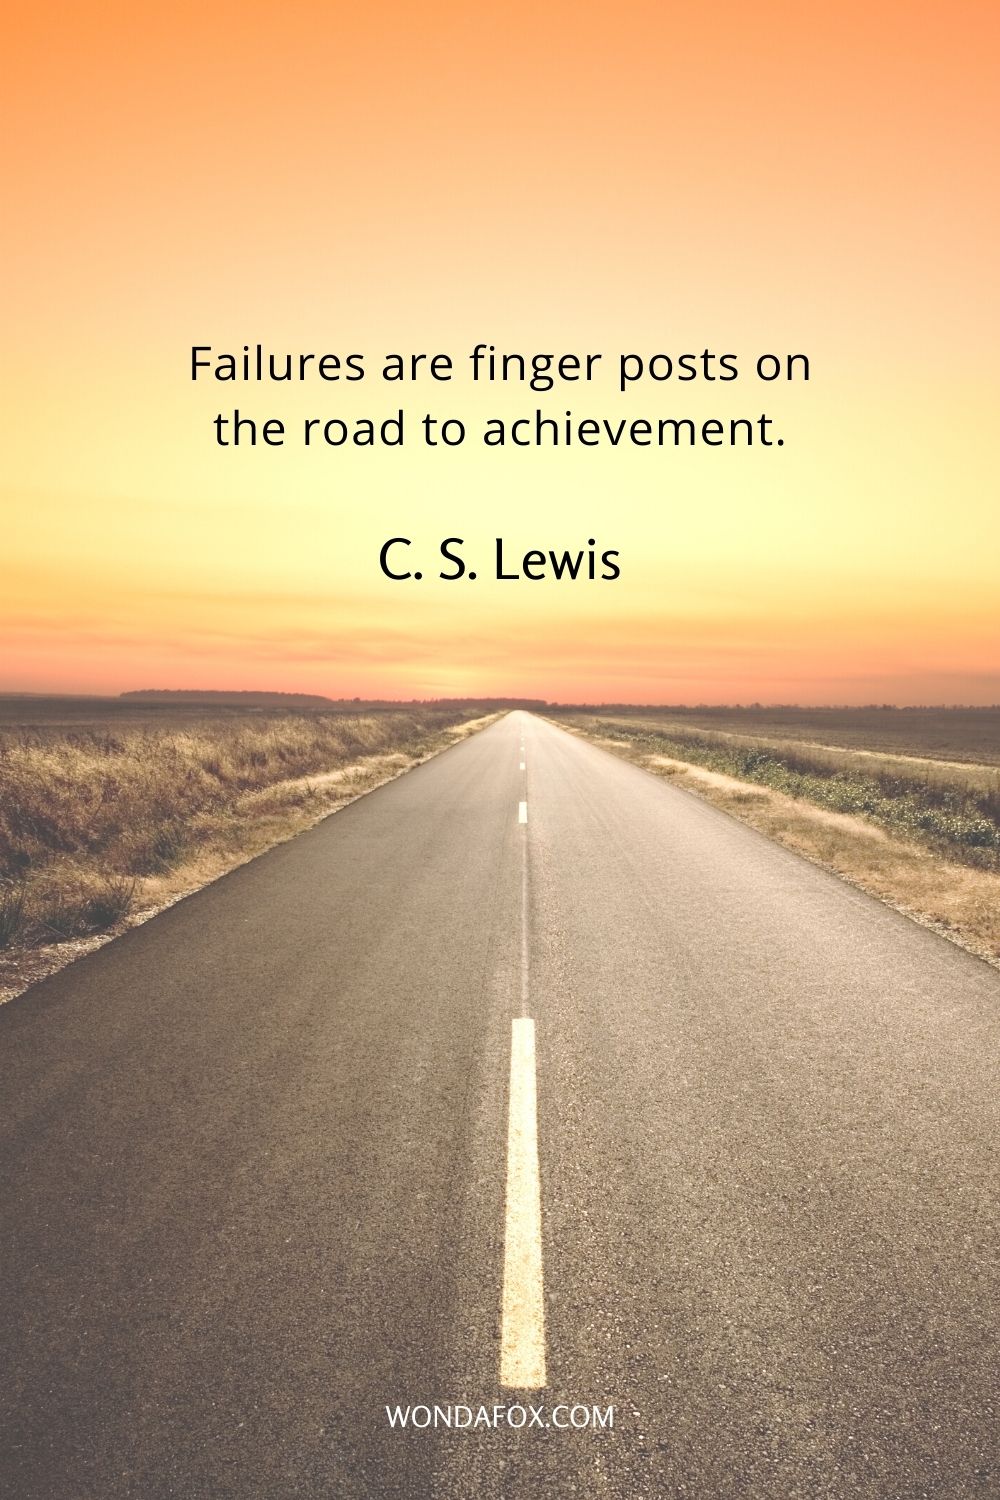 Failures are finger posts on the road to achievement.